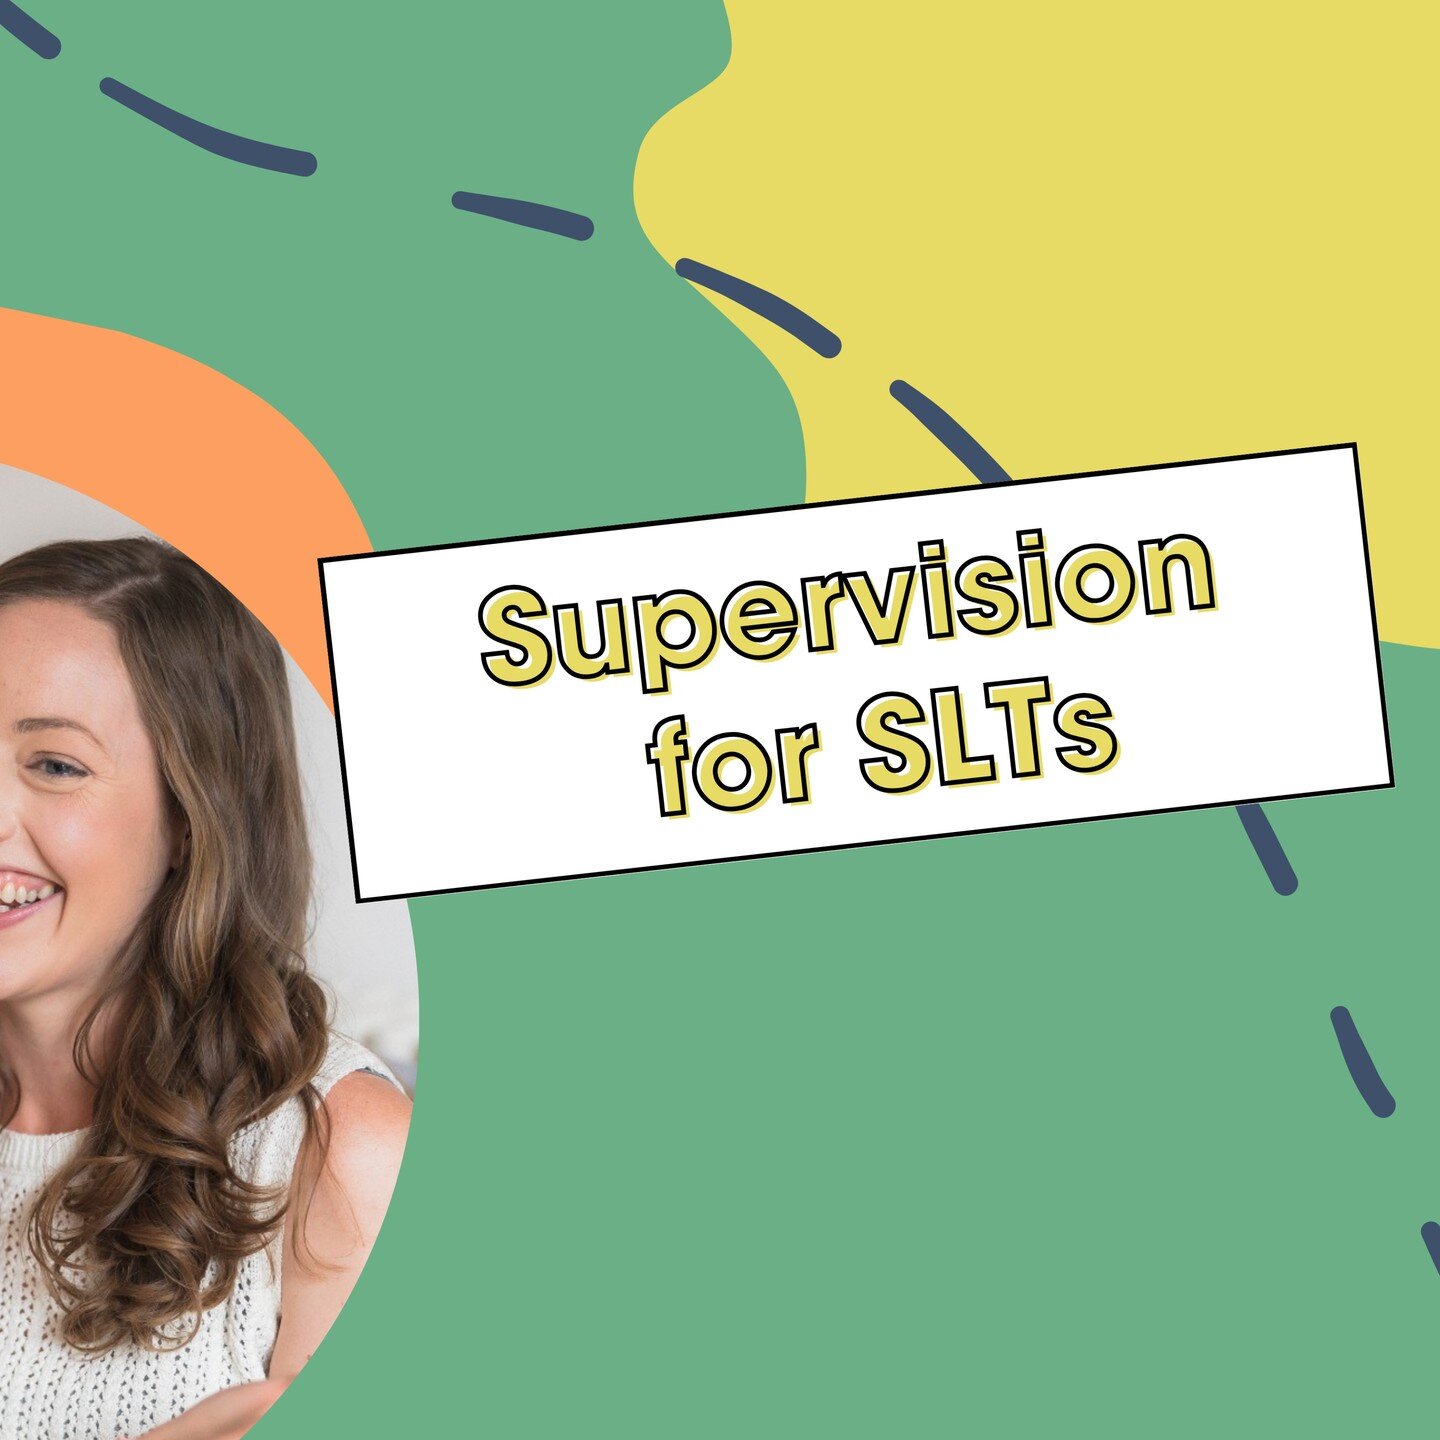 ✨ Supervision for Speech and Language Therapists ✨

If you&rsquo;re a SLT looking for a supervisor, I&rsquo;d love to help!

I&rsquo;m particularly passionate about SLT wellbeing and how we can work in a way that is aligned with our values and goals,